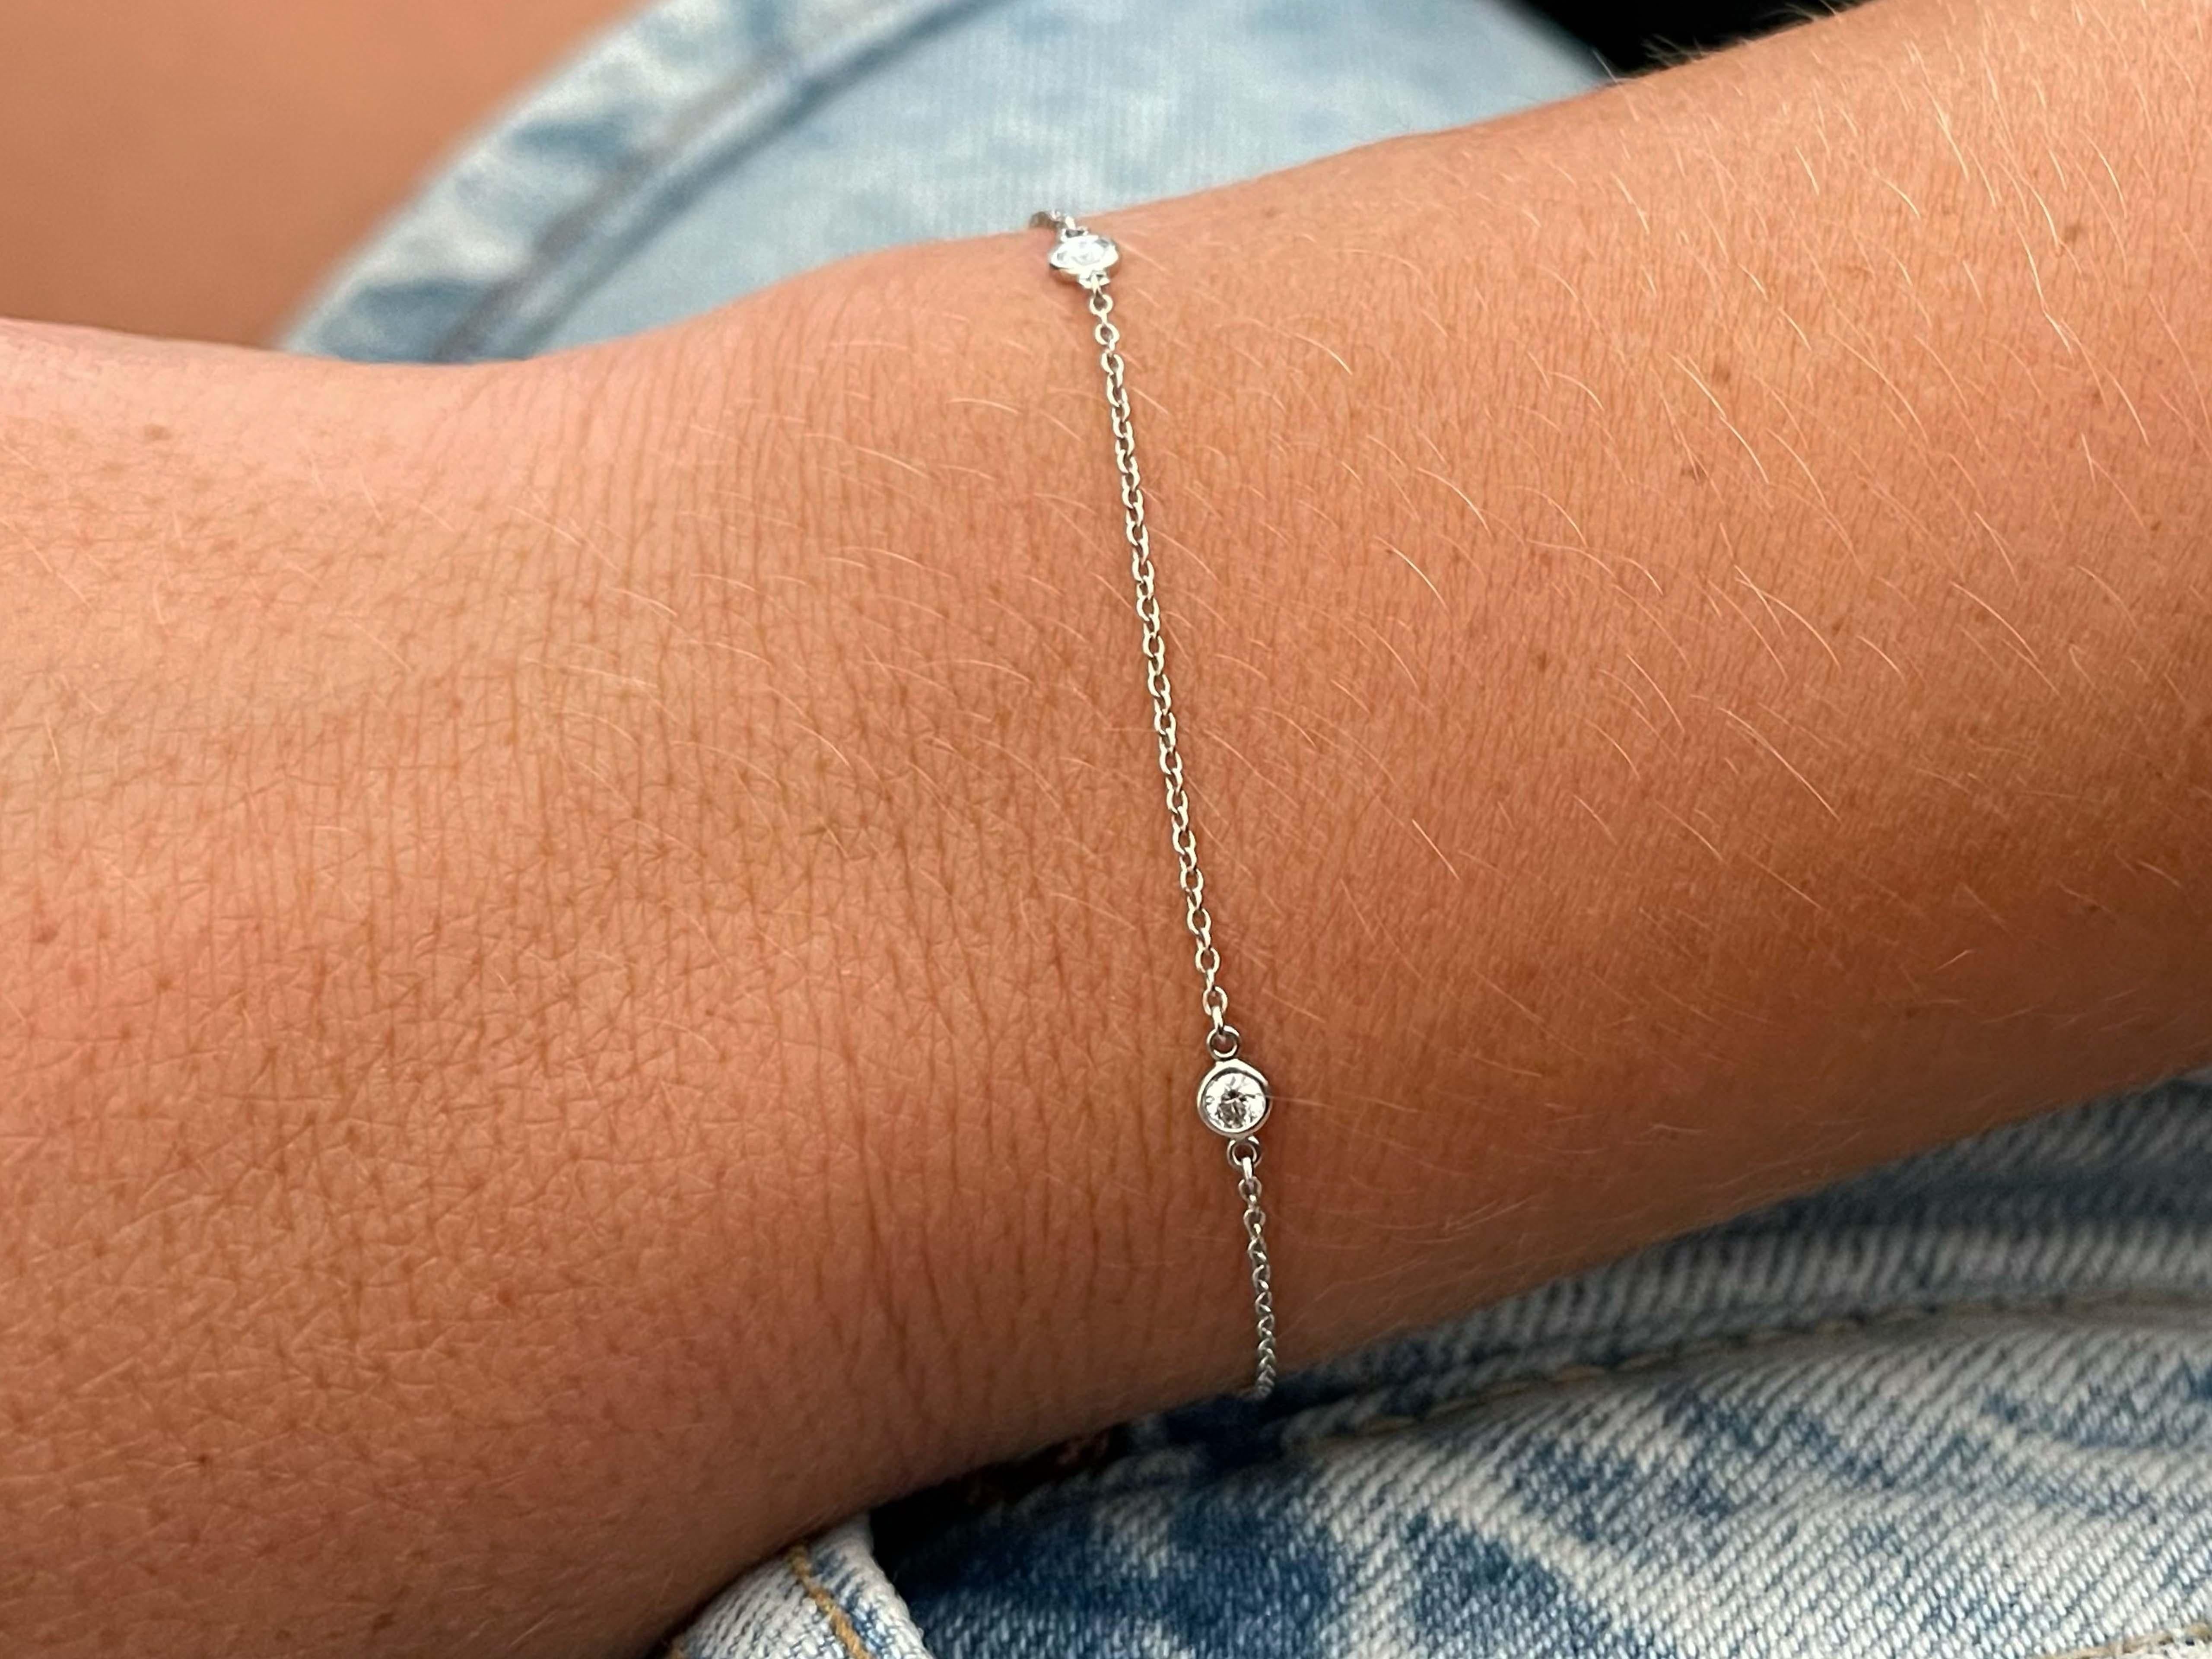 This beautiful diamond studded bracelet has 3 brilliant cut bezel set round diamonds. The diamonds on the pendant are F-G color, VS clarity and weight 0.15 carats. This bracelet is crafted in platinum 950. Fits a wrist size up to 6 inches.